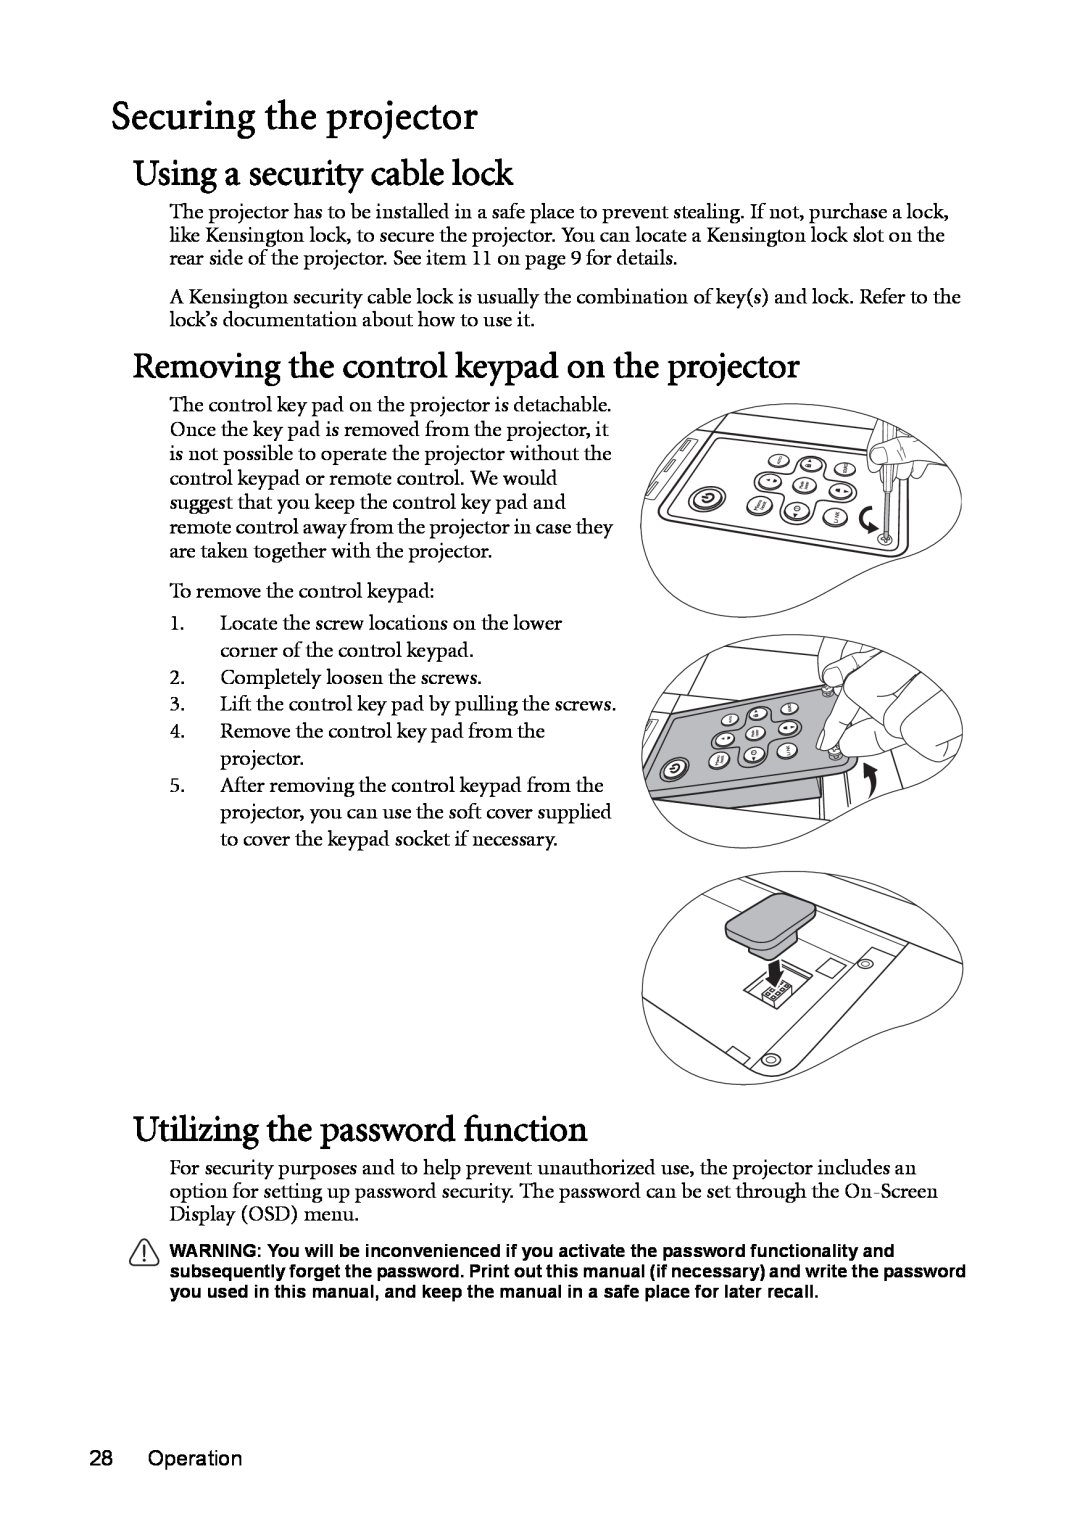 BenQ MP723 user manual Securing the projector, Using a security cable lock, Removing the control keypad on the projector 